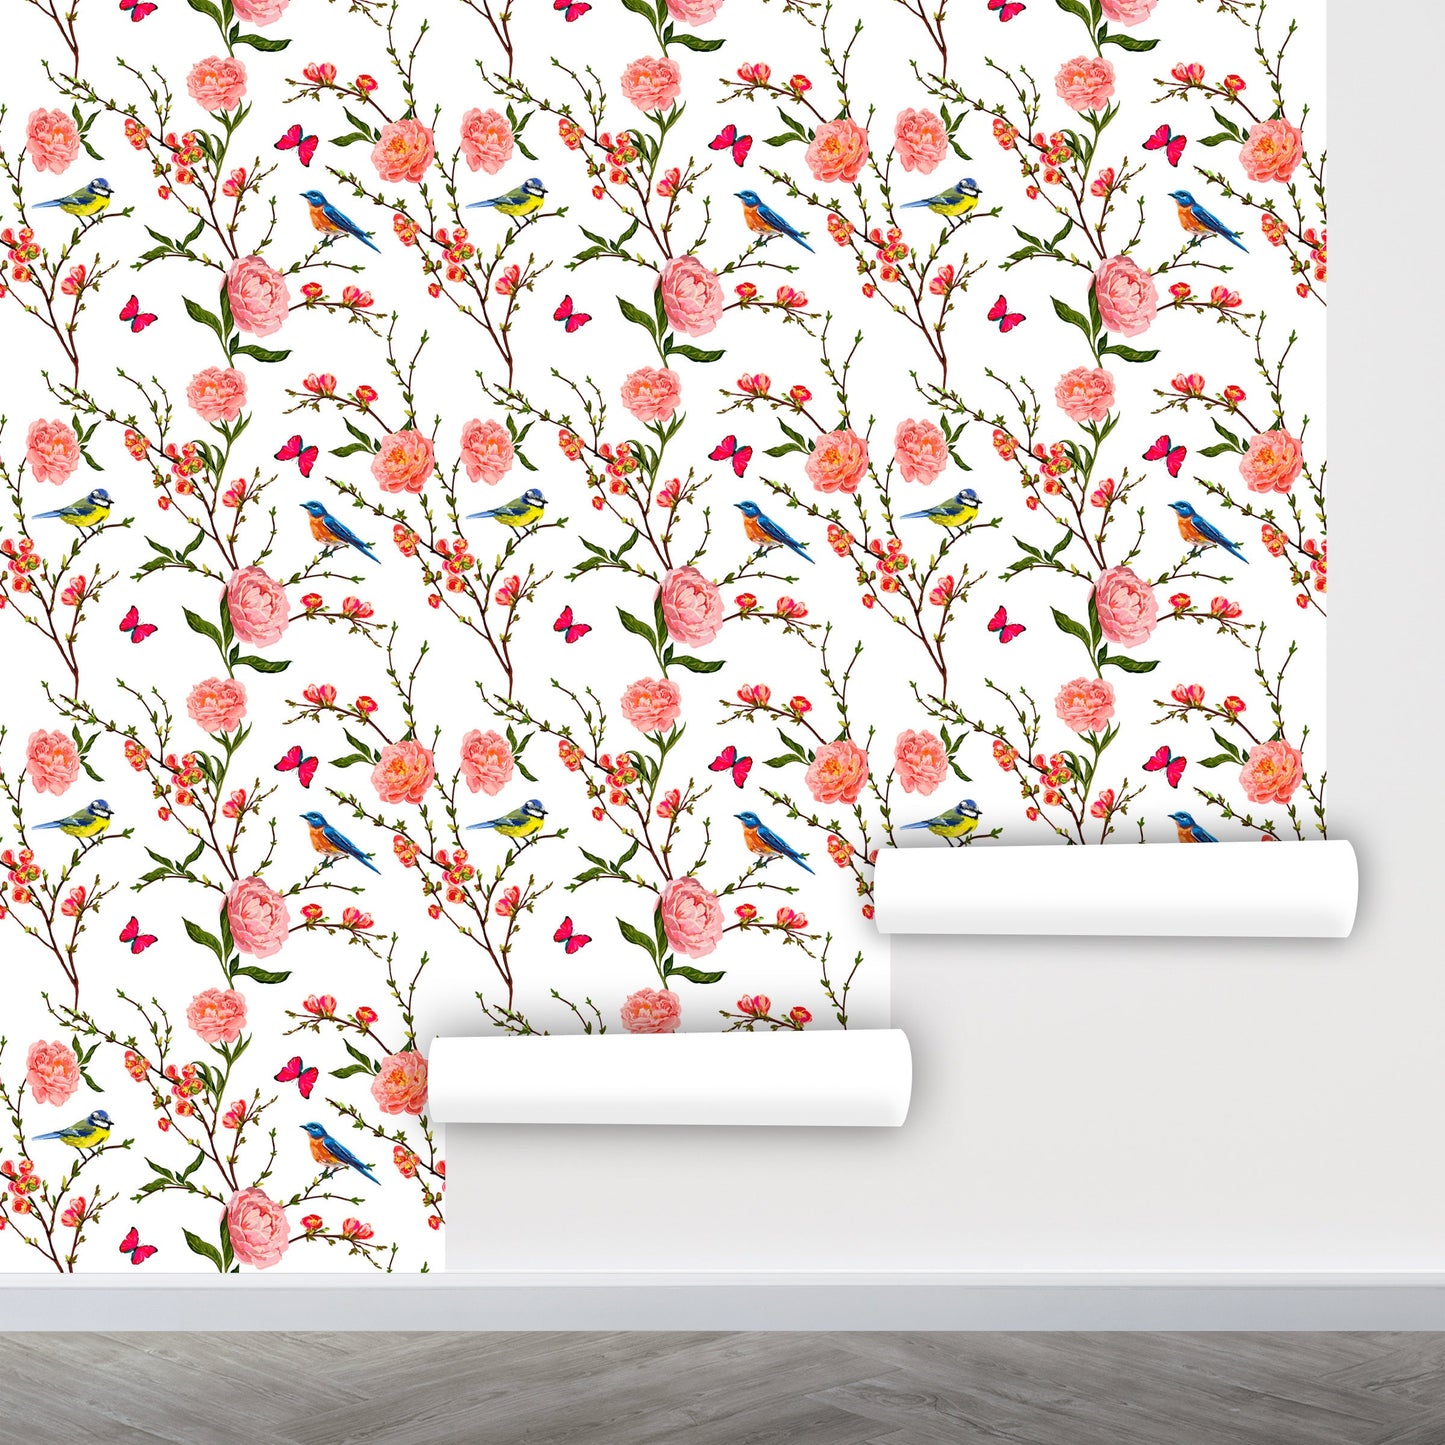 Birds and Butterfly Wallpaper Peel and Stick, Sakura Wallpaper, Branches Wallpaper, Pink Floral Wallpaper, Removable Wall Paper